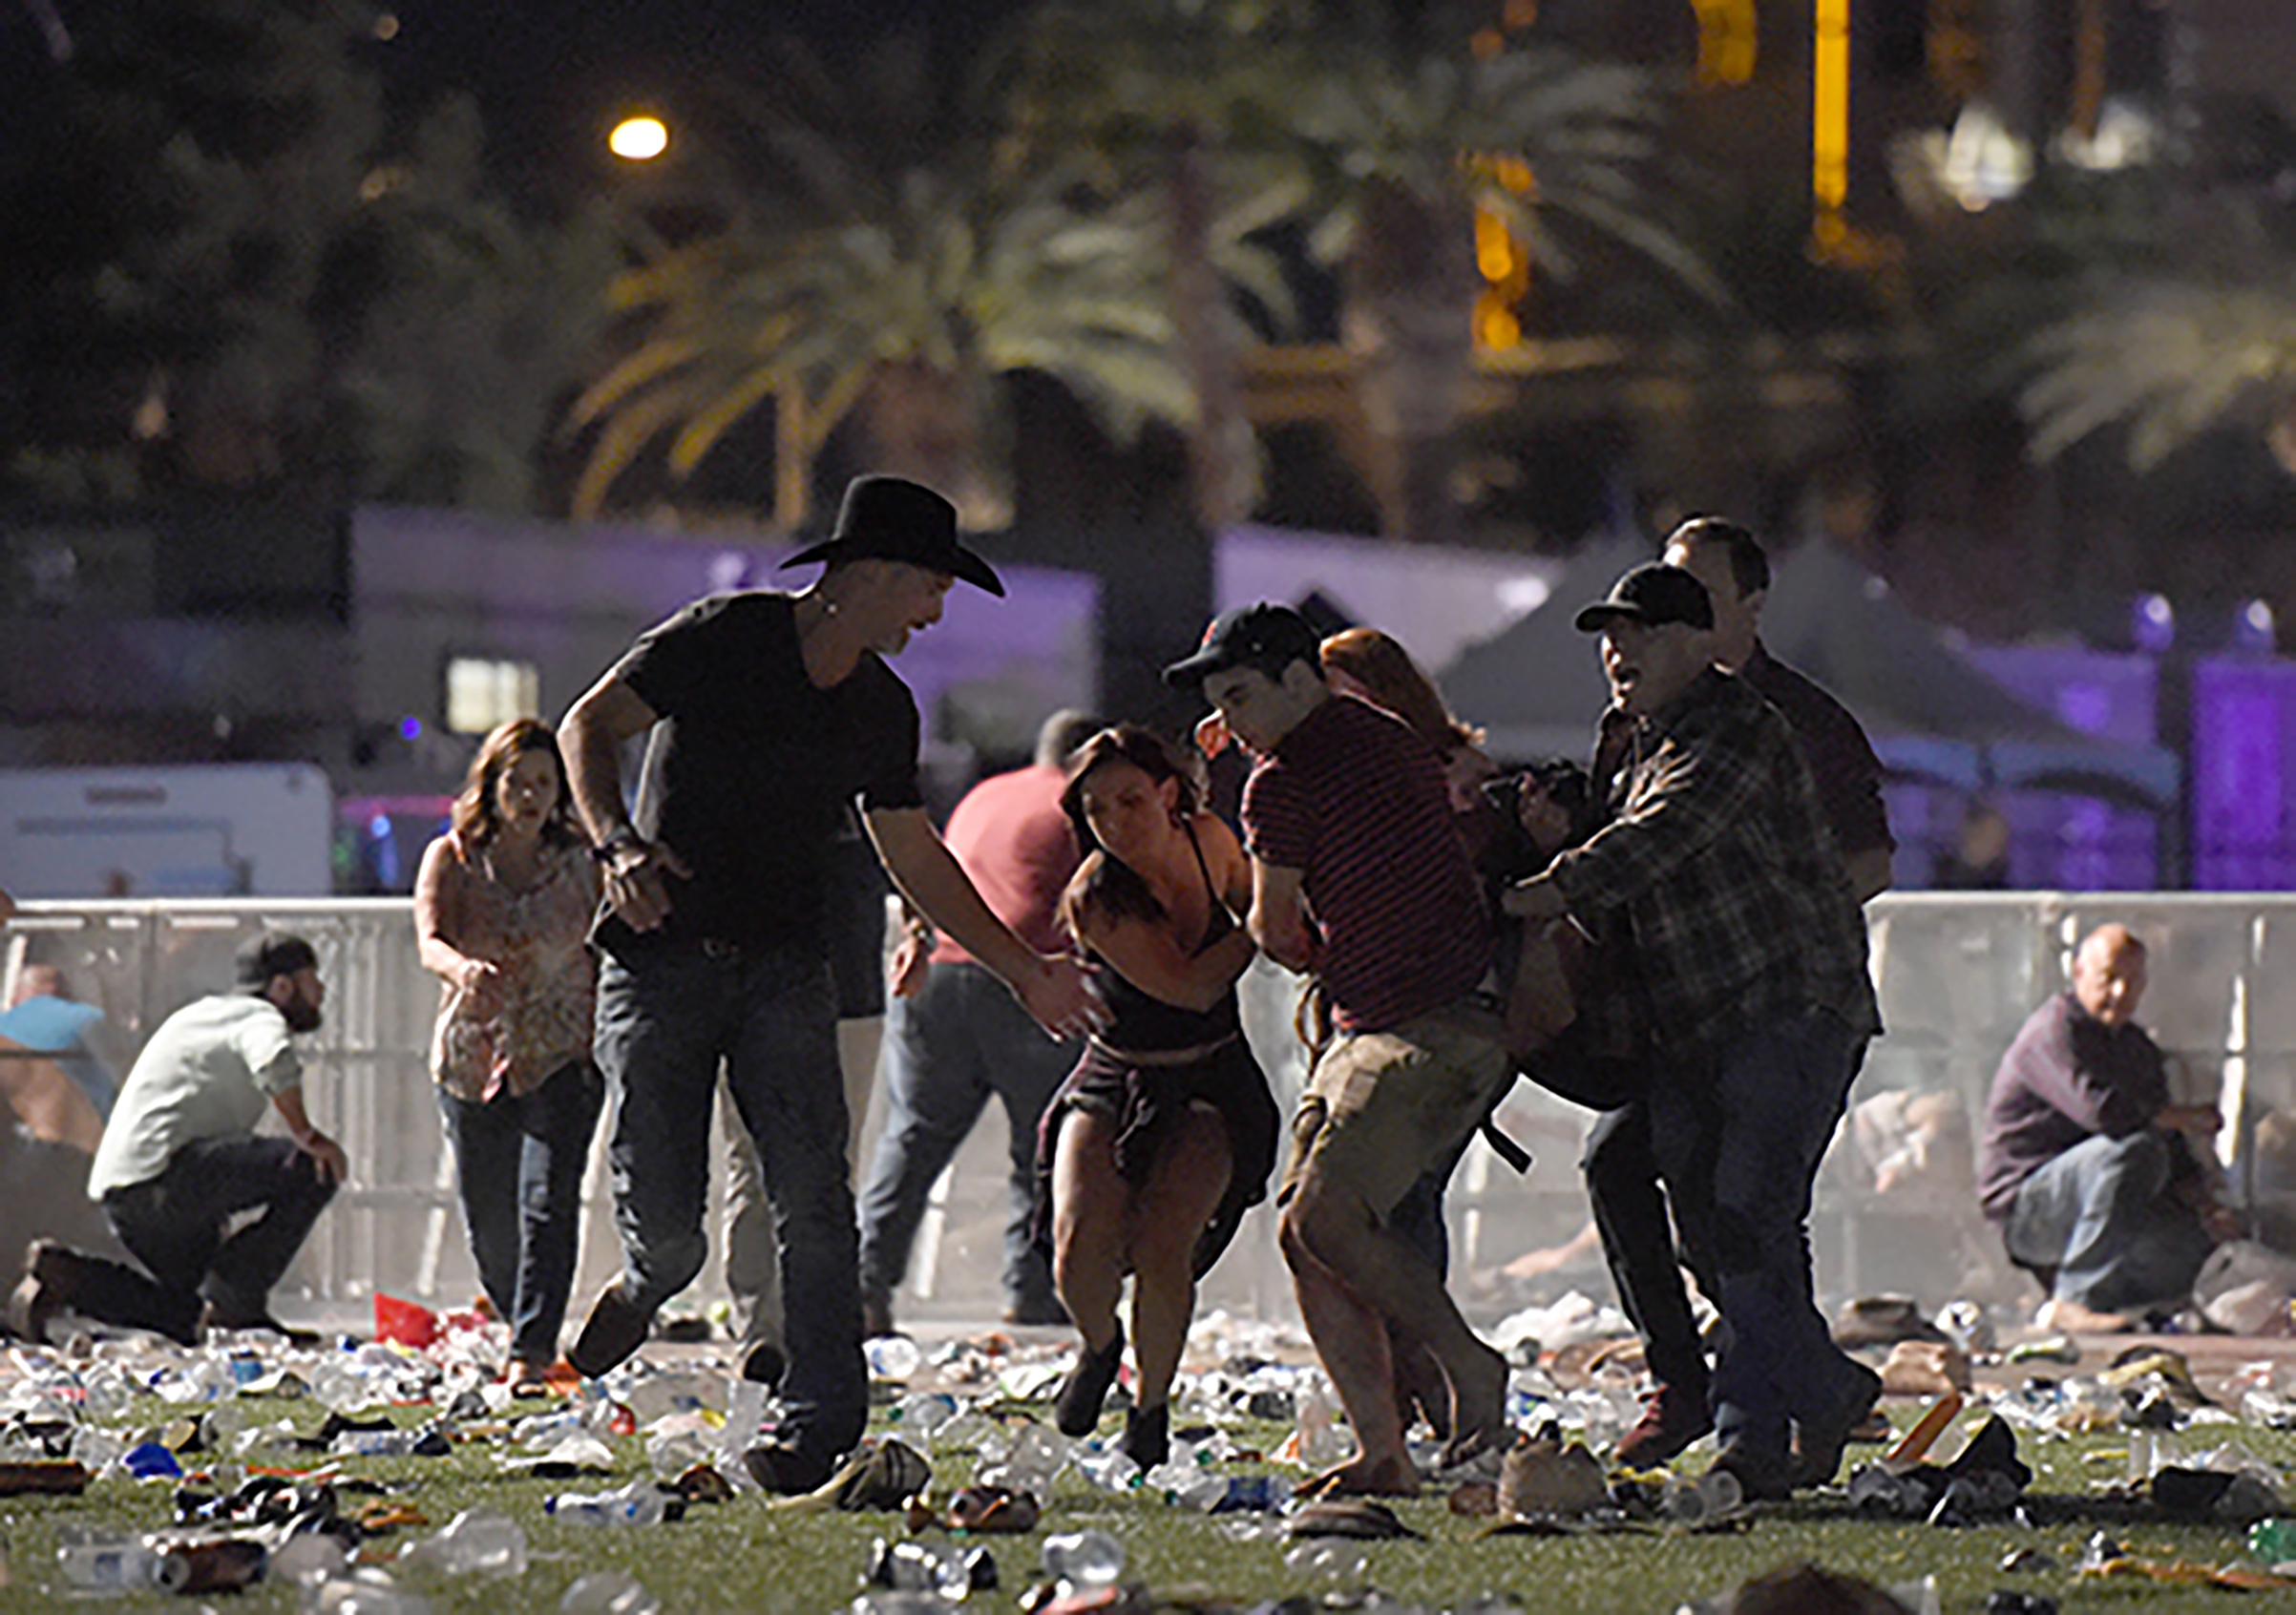 People carry a person after a shooting at the Route 91 Harvest country music festival after a shooting, Oct. 1, 2017 in Las Vegas.